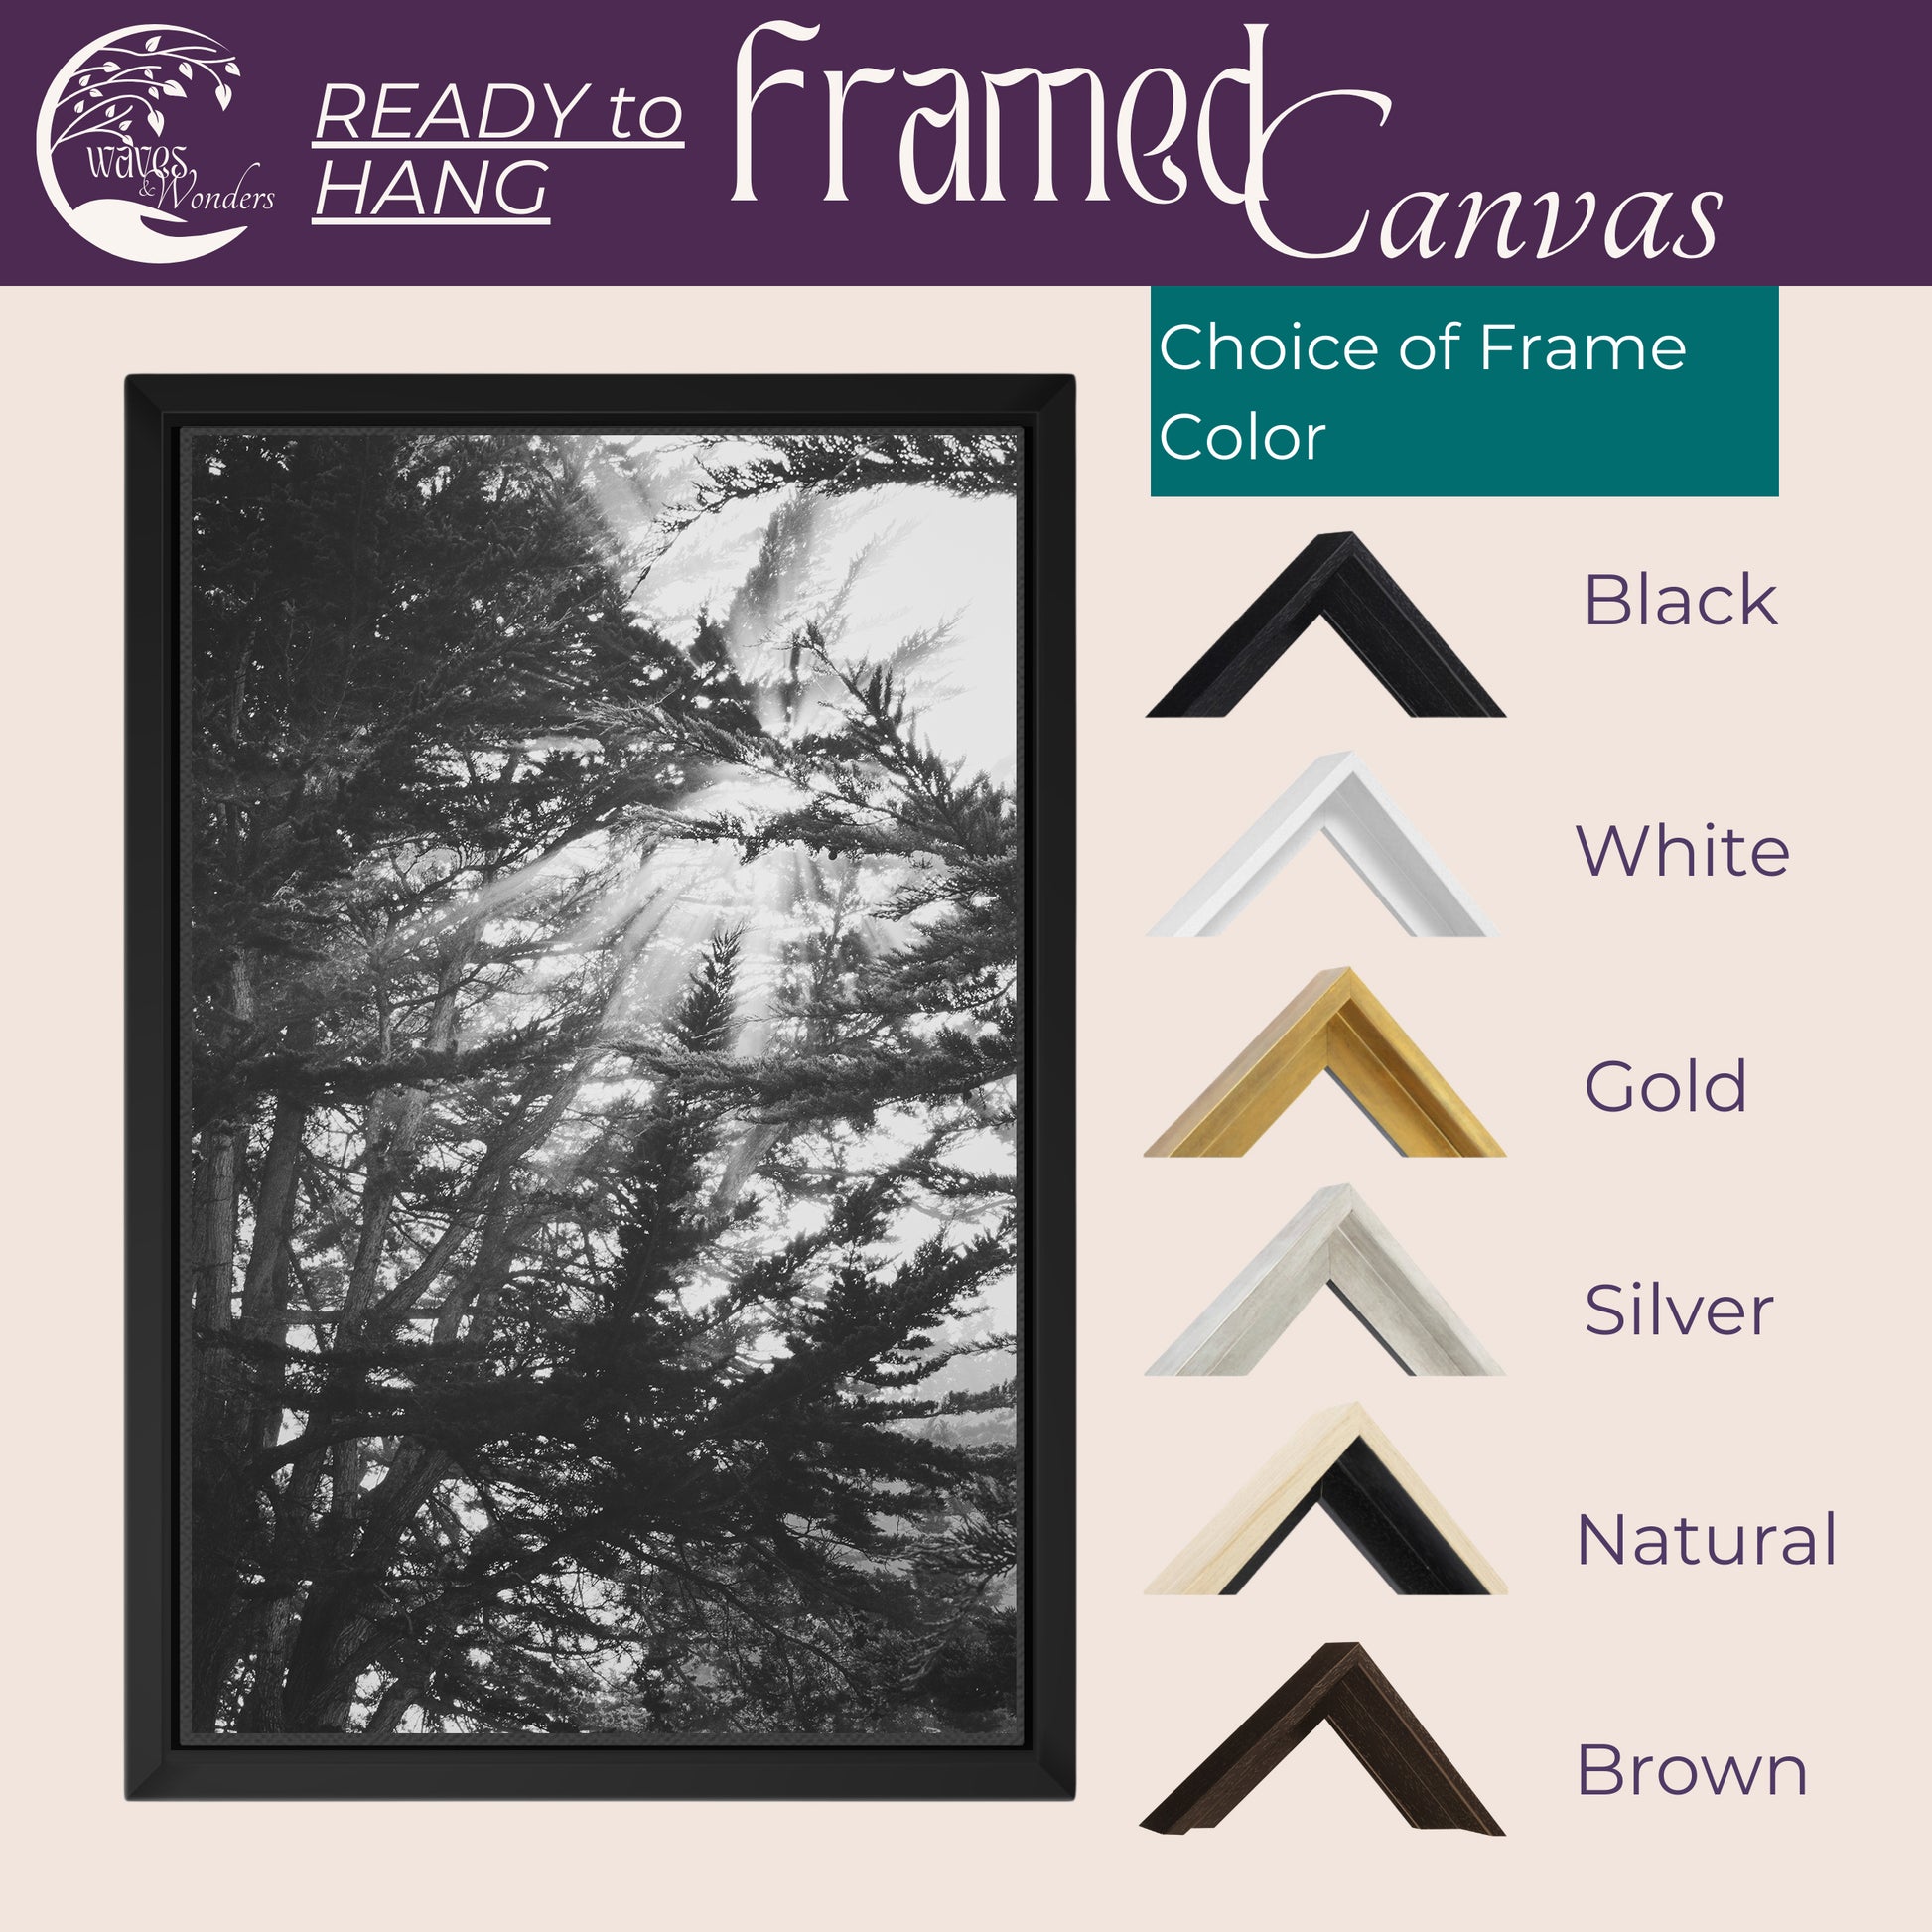 framed canvass with different colors and sizes of frames